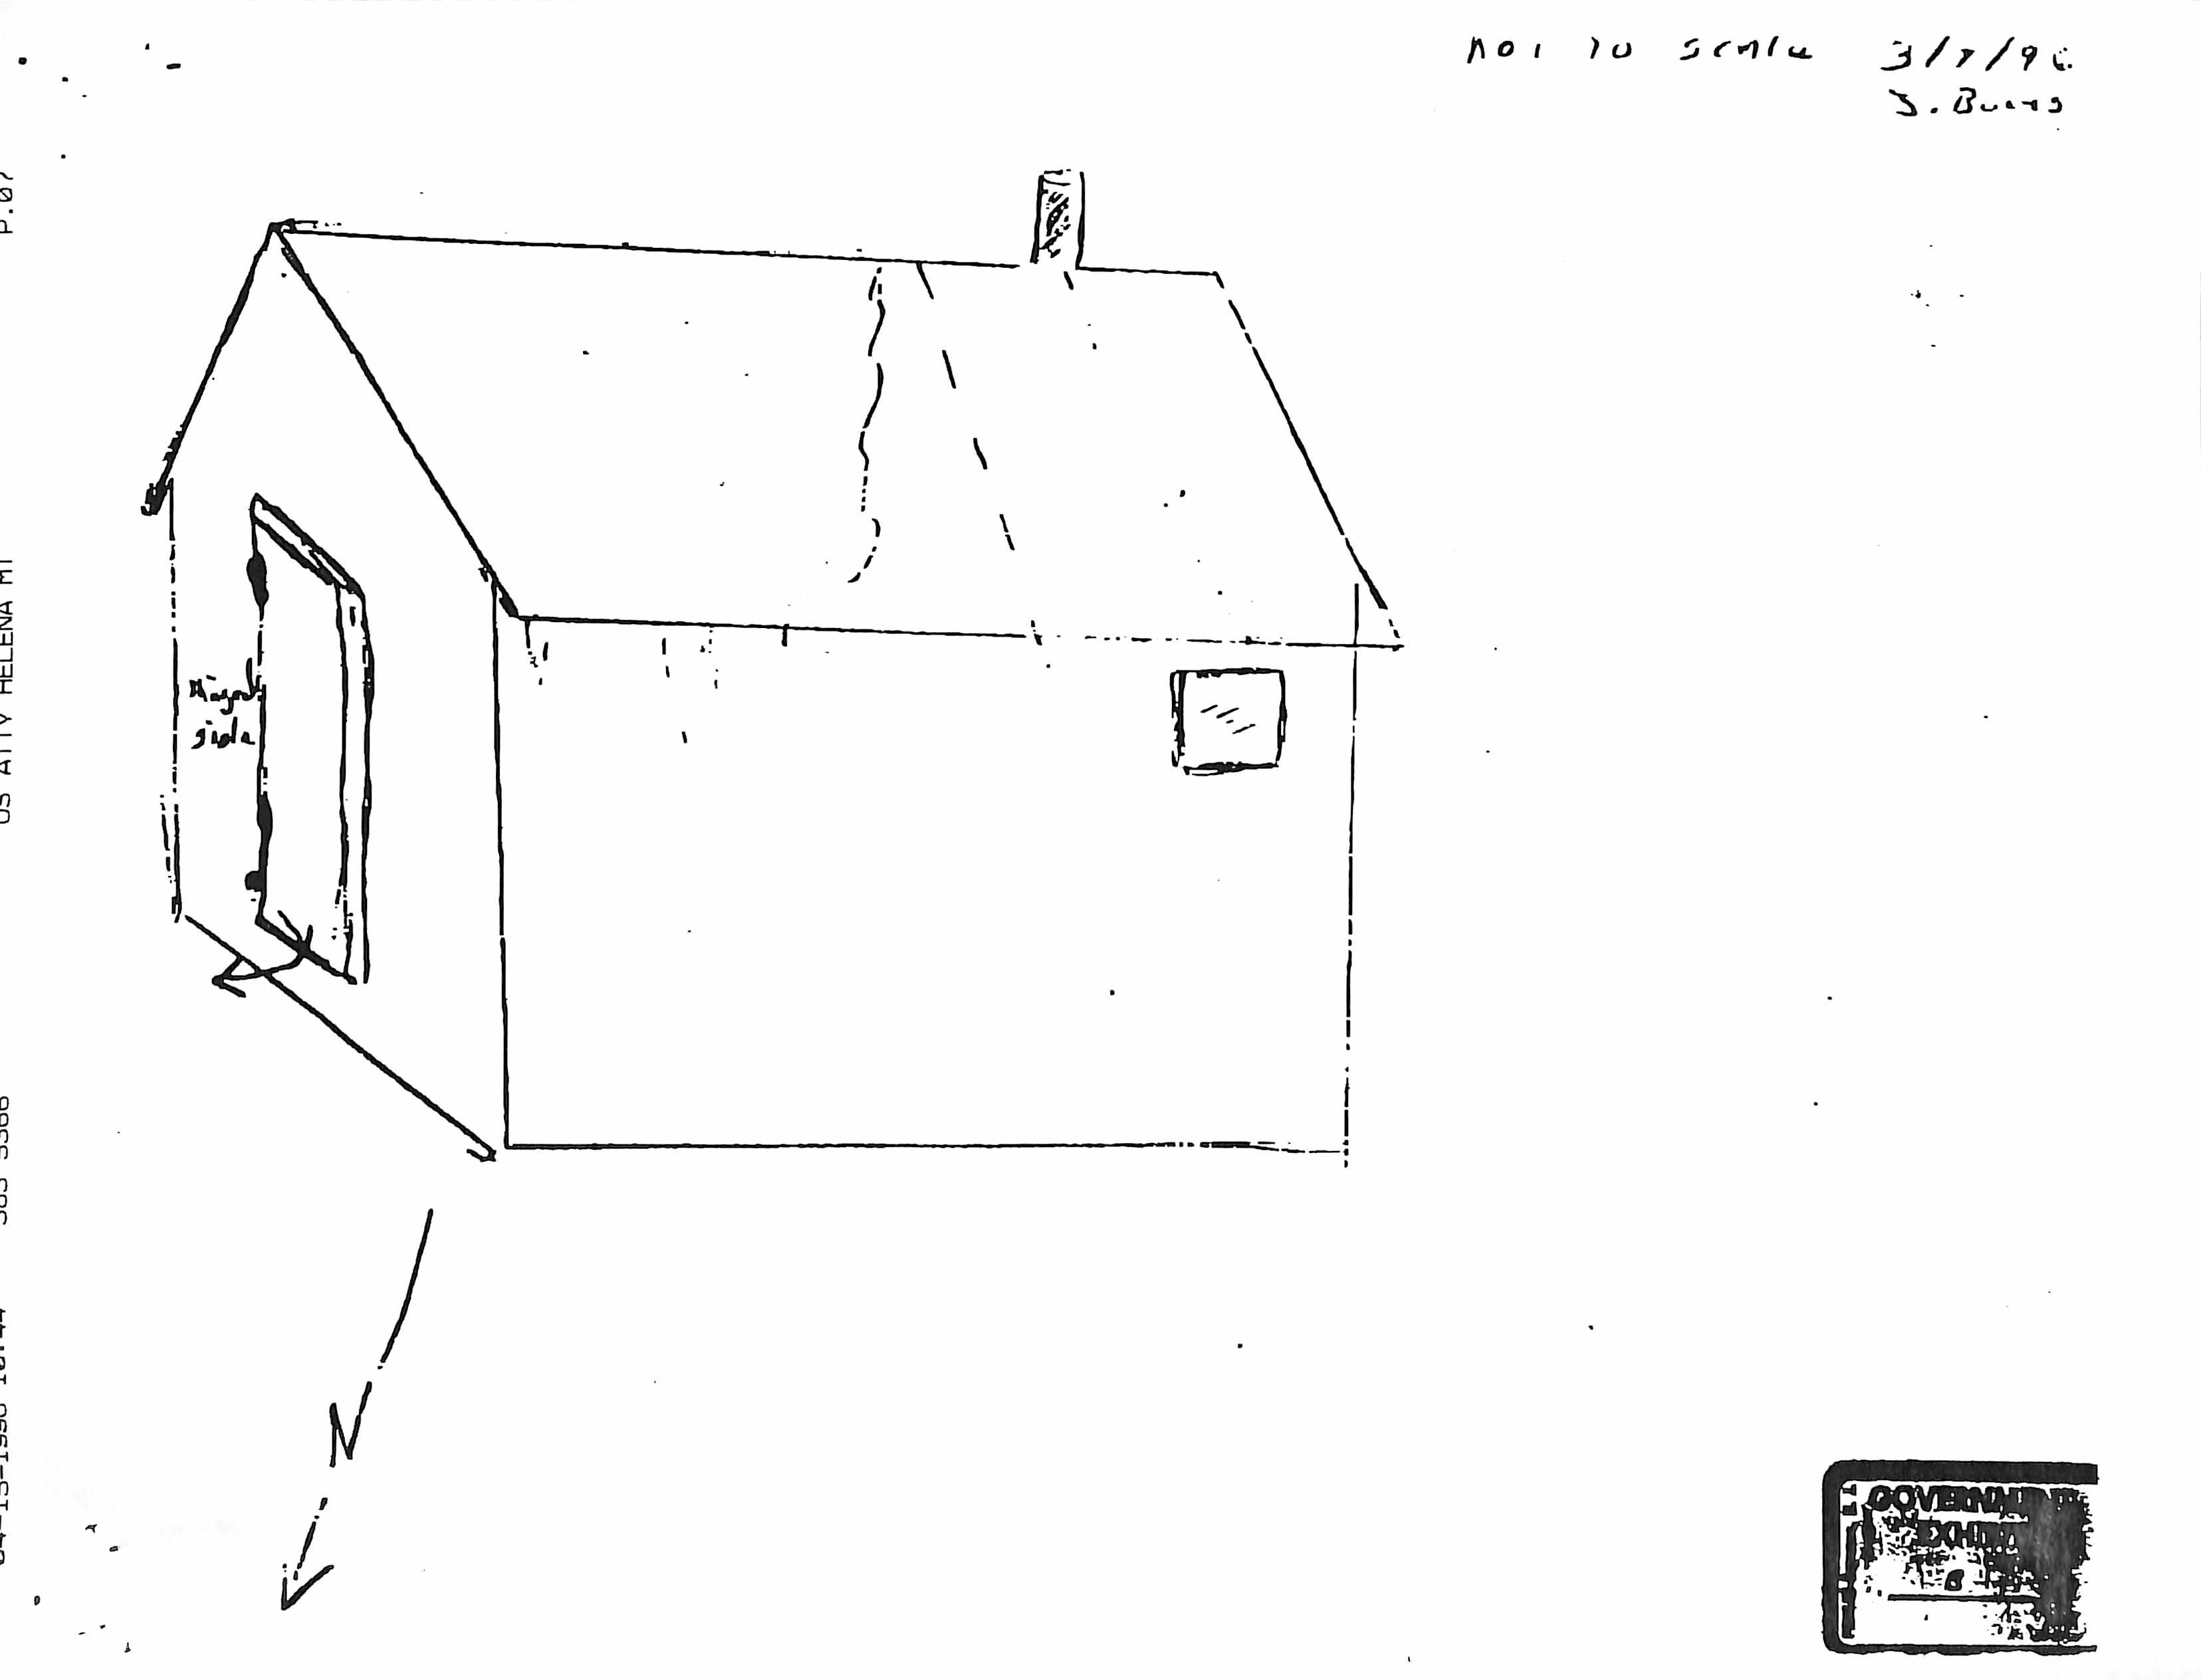 t-s-the-search-warrant-for-ted-kaczynski-s-cabin-3.jpg